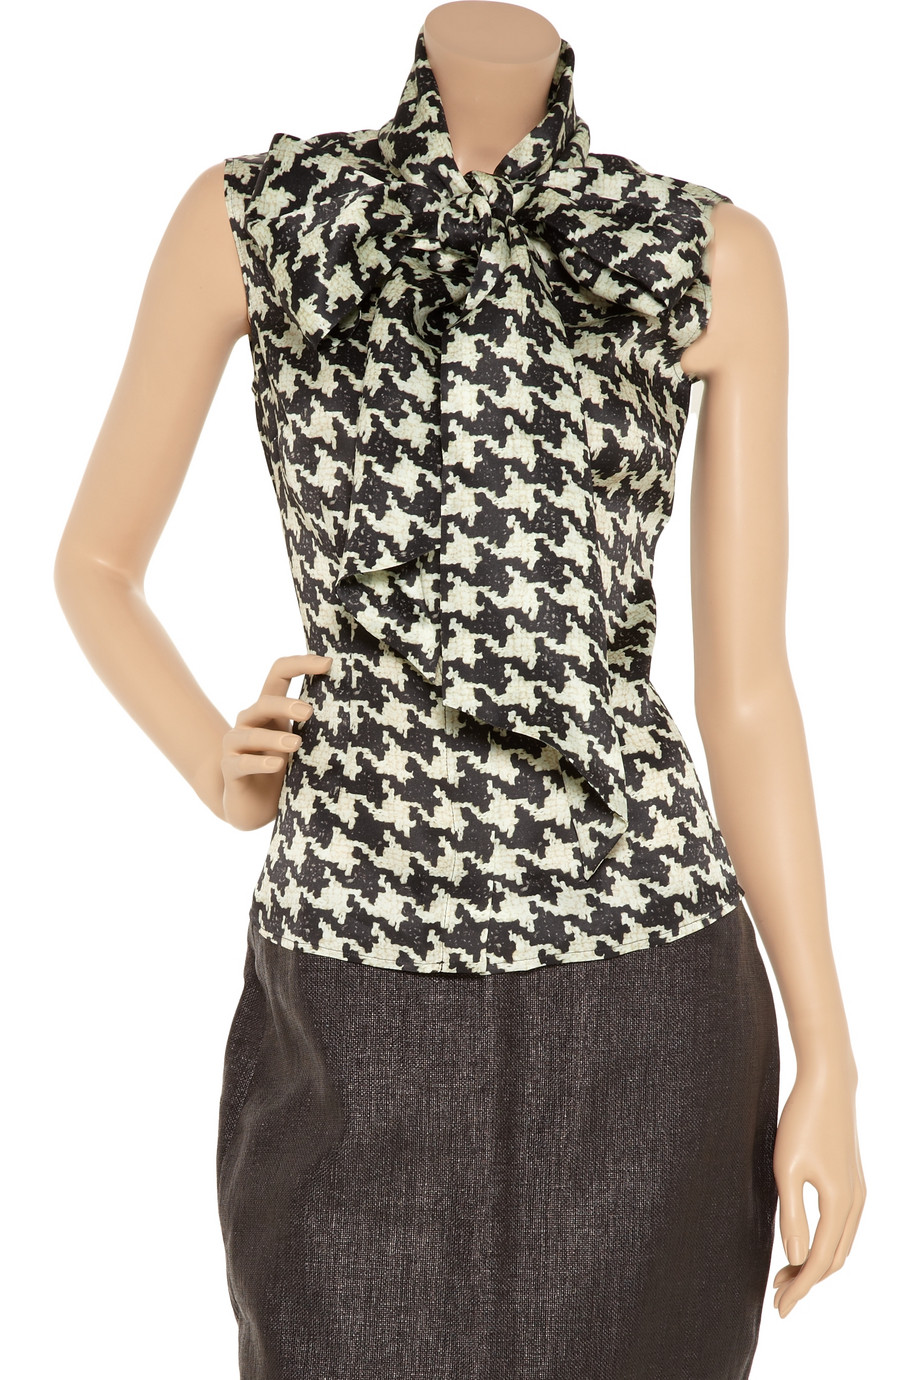 Alexander McQueen Houndstooth Pussy-bow Shirt in Black - Lyst